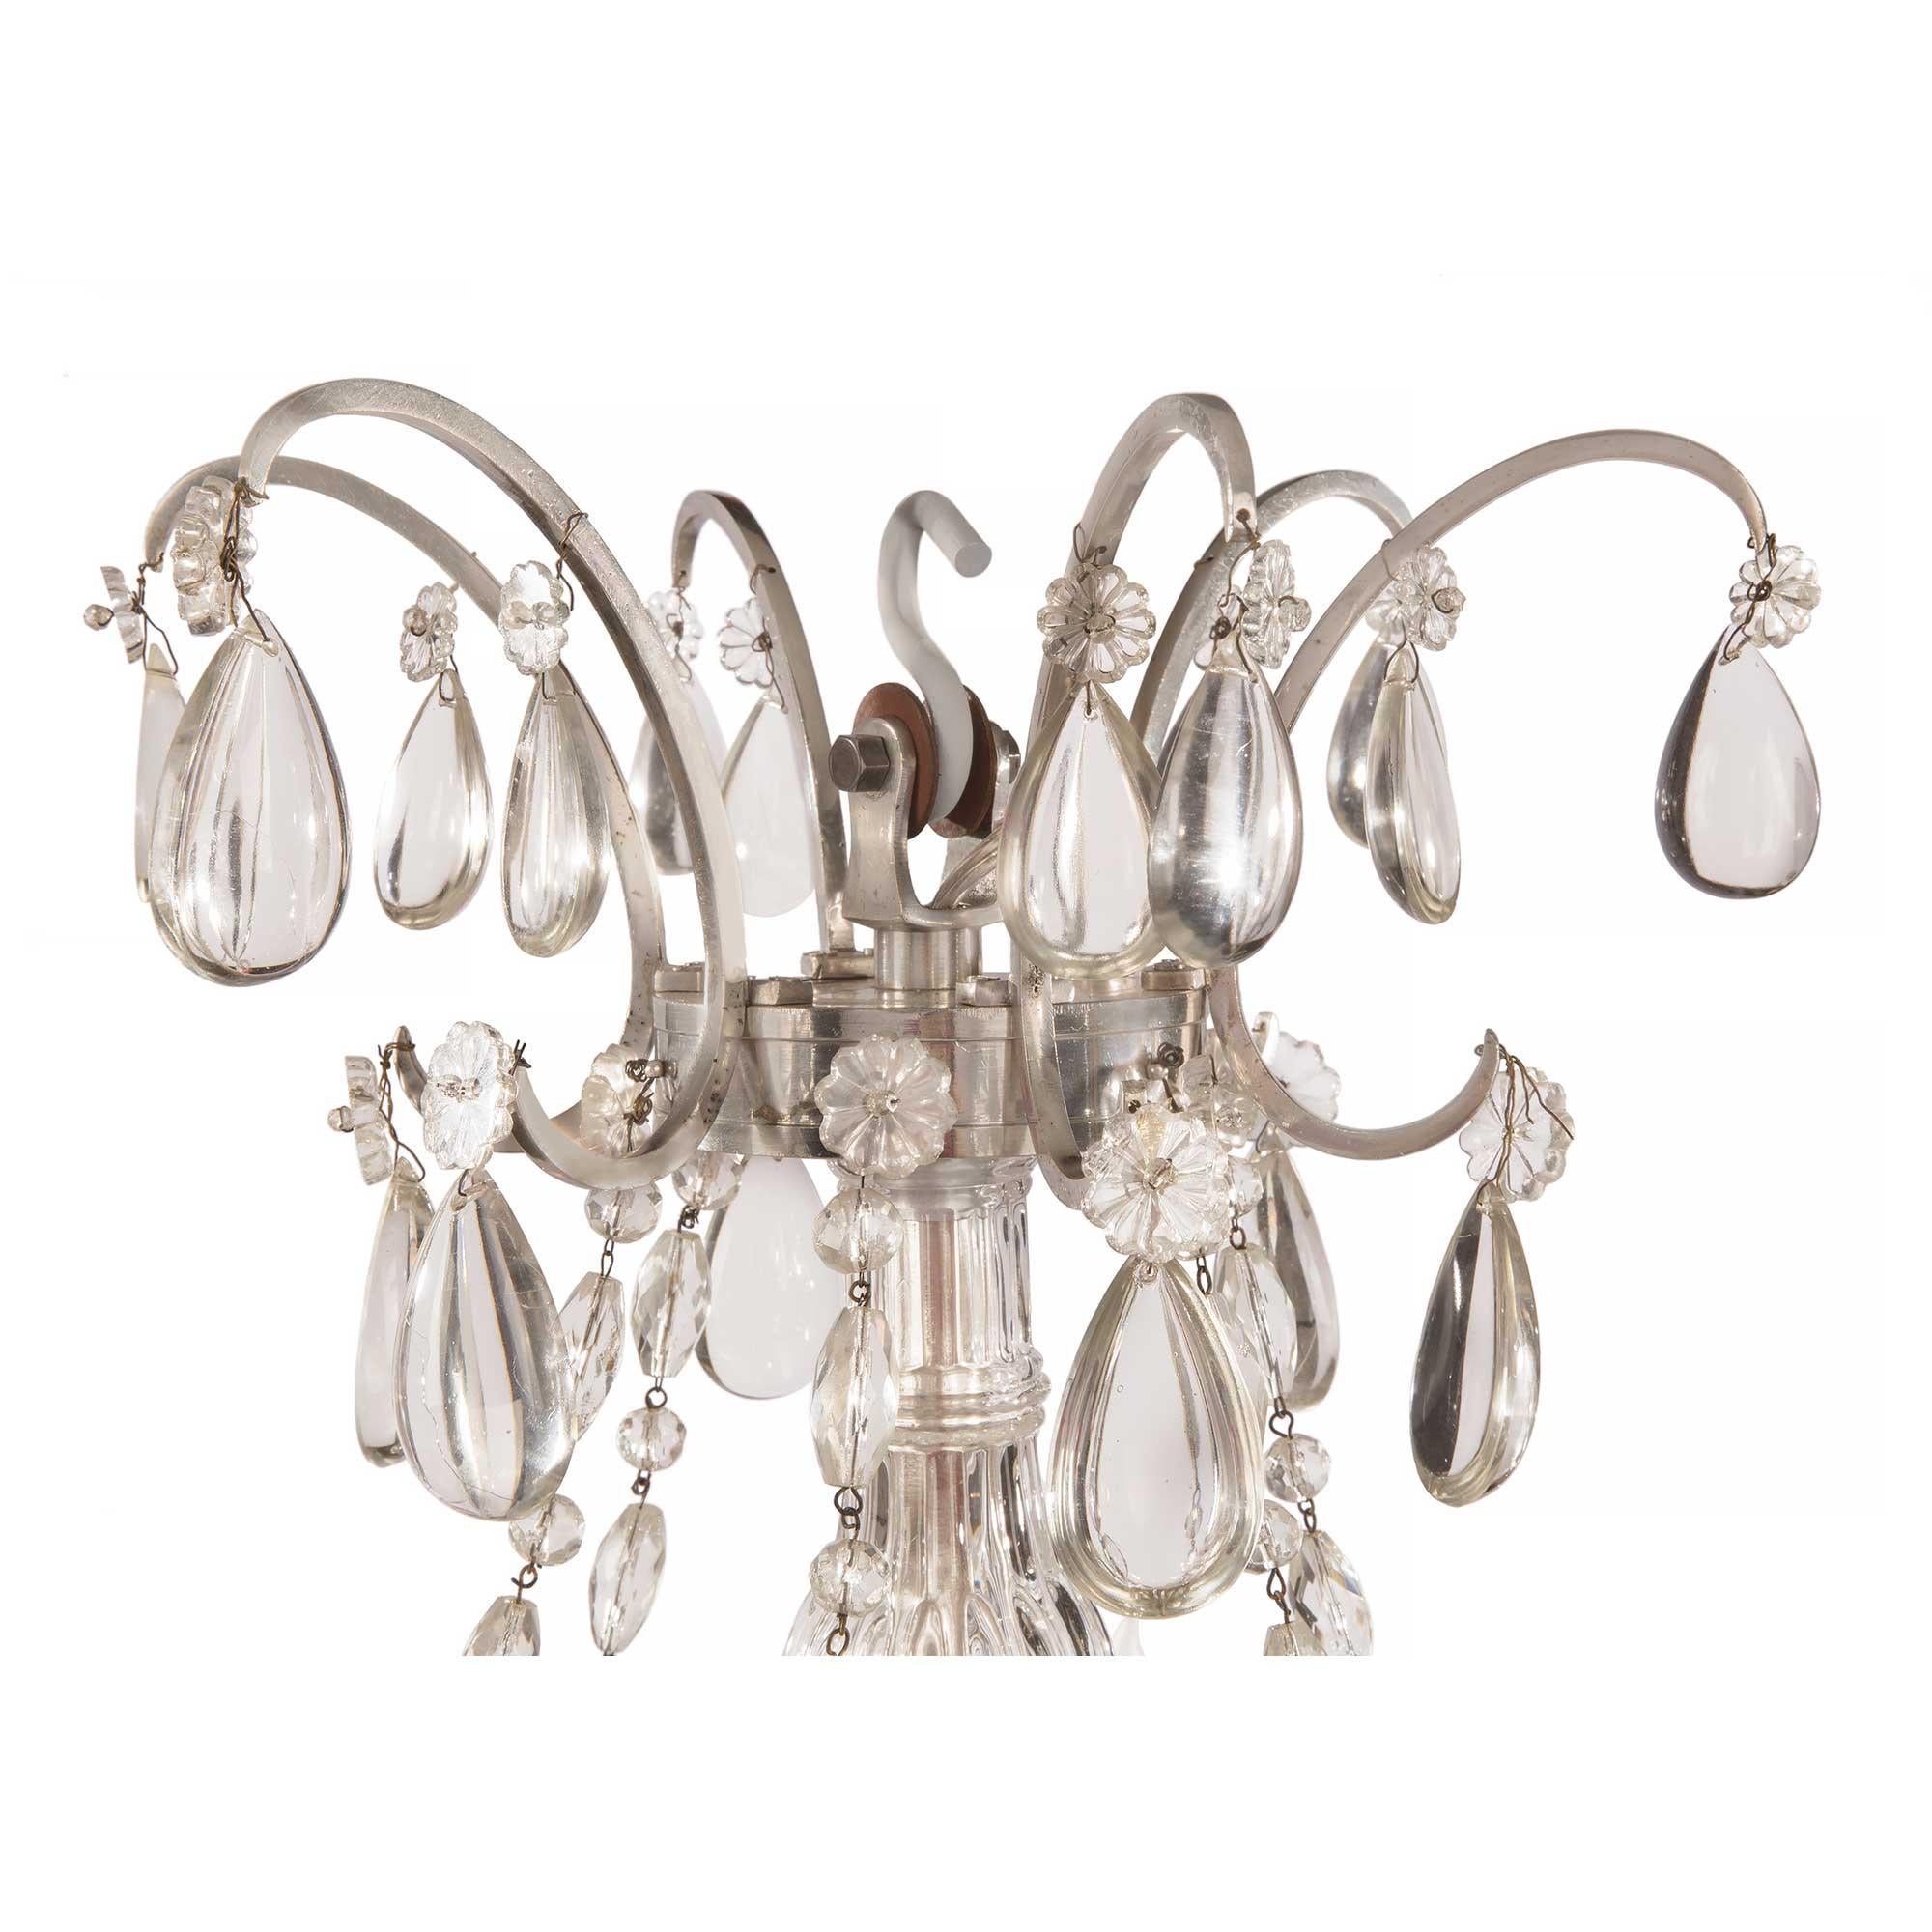 An elegant French 19th century Louis XVI st. silvered bronze and Baccarat crystal six arm chandelier. The chandelier is centered by a fine solid Baccarat crystal ball below a lovely silvered bronze tier hung by fine beaded garlands and adorned with